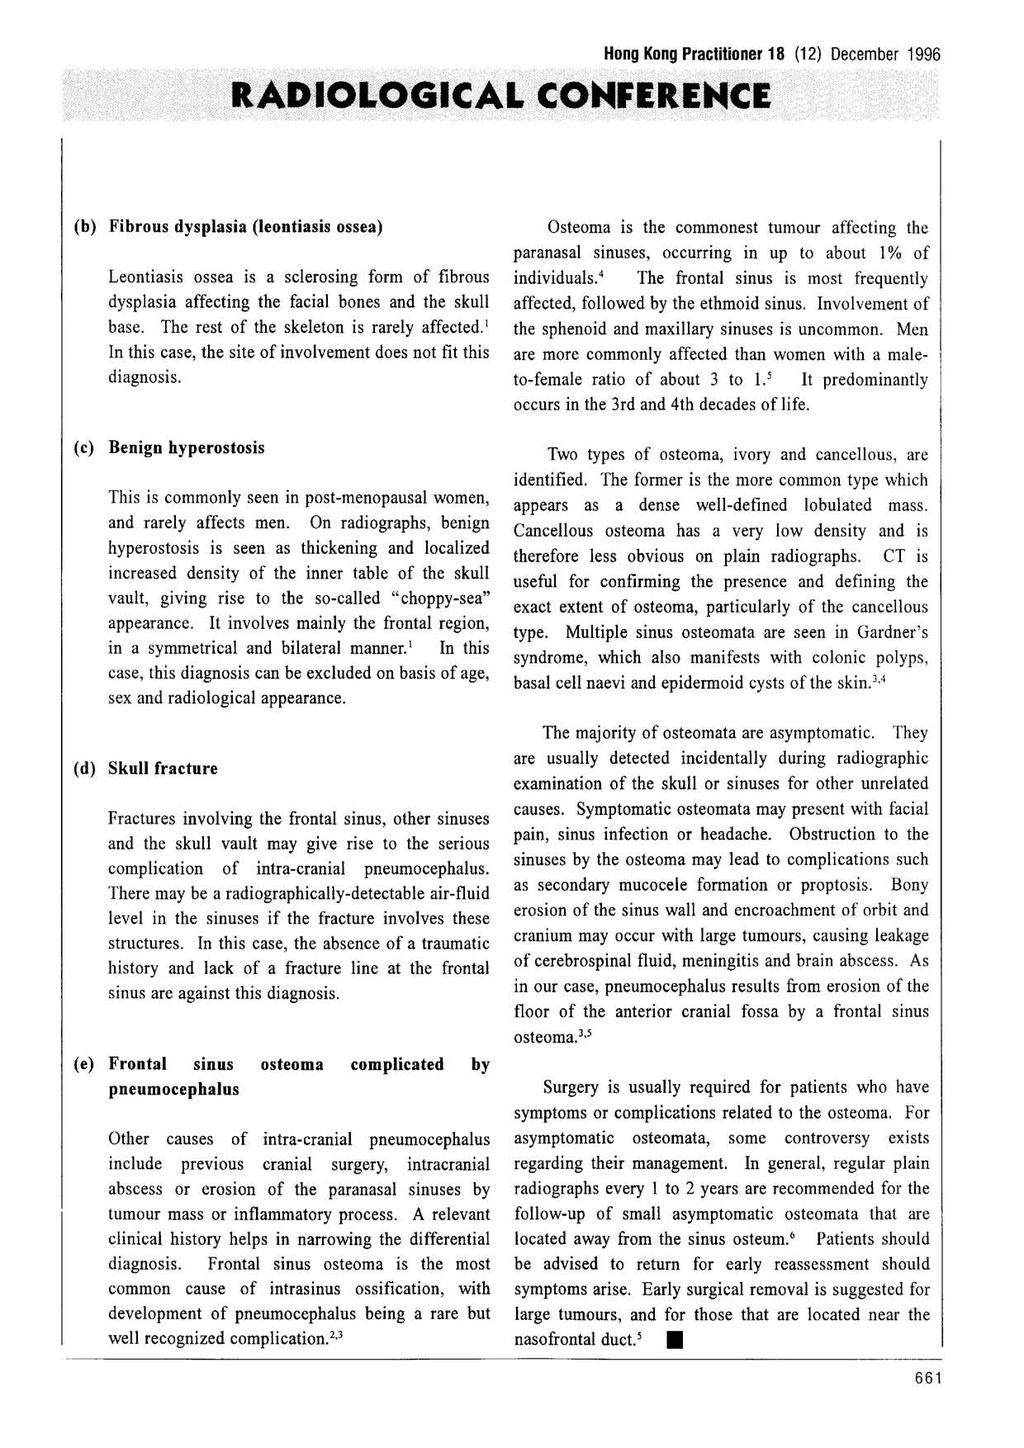 Hong Kong Practitioner 18 (12) December 1996 RADIOLOGICAL CONFERENCE (b) Fibrous dysplasia (leontiasis ossea) Leontiasis ossea is a sclerosing form of fibrous dysplasia affecting the facial bones and